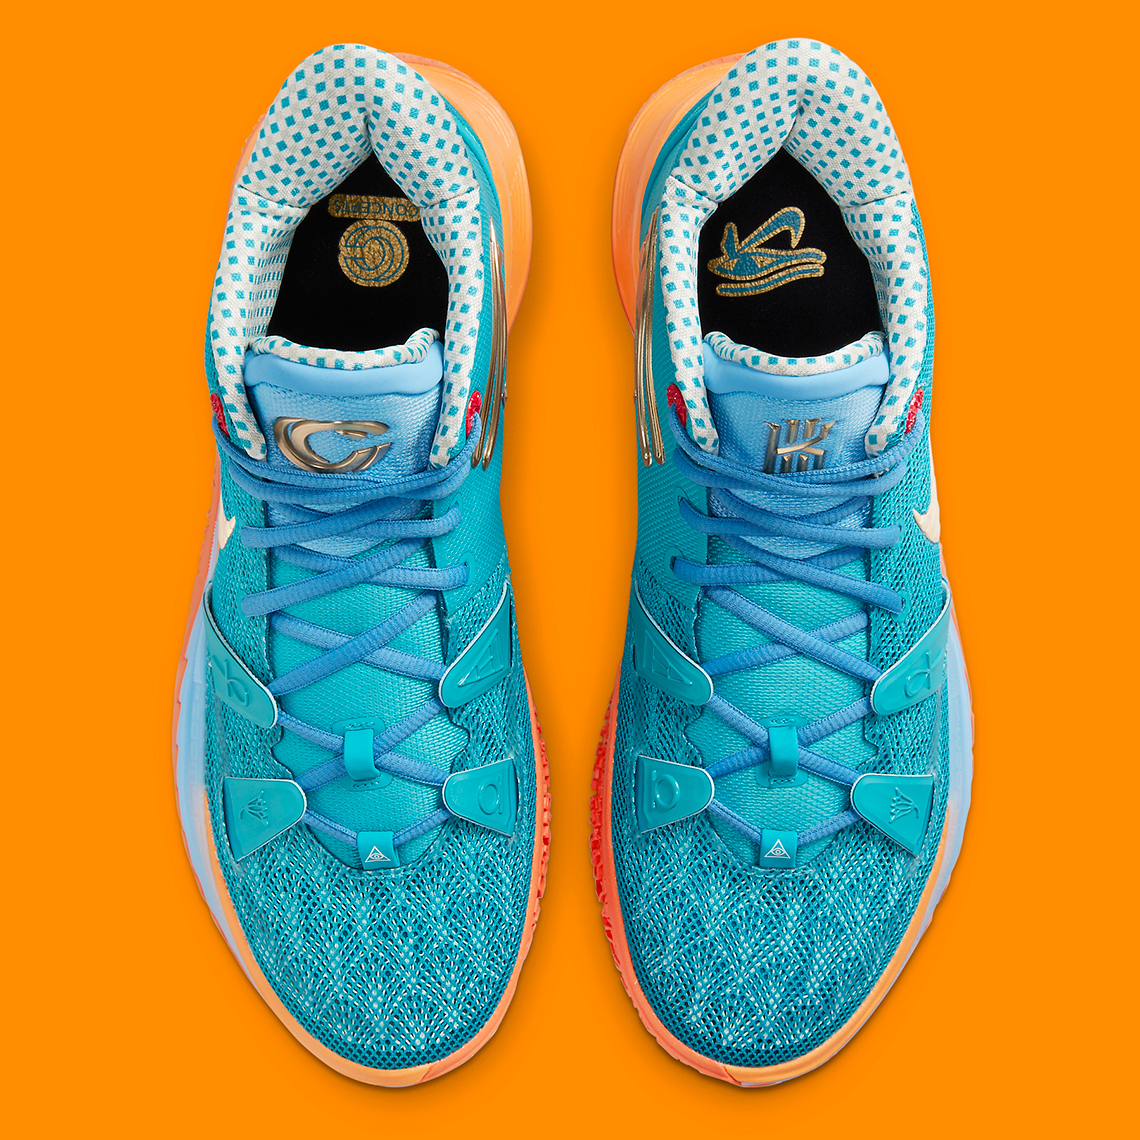 Nike Kyrie 7 Horus Concepts Sneakers - Farfetch